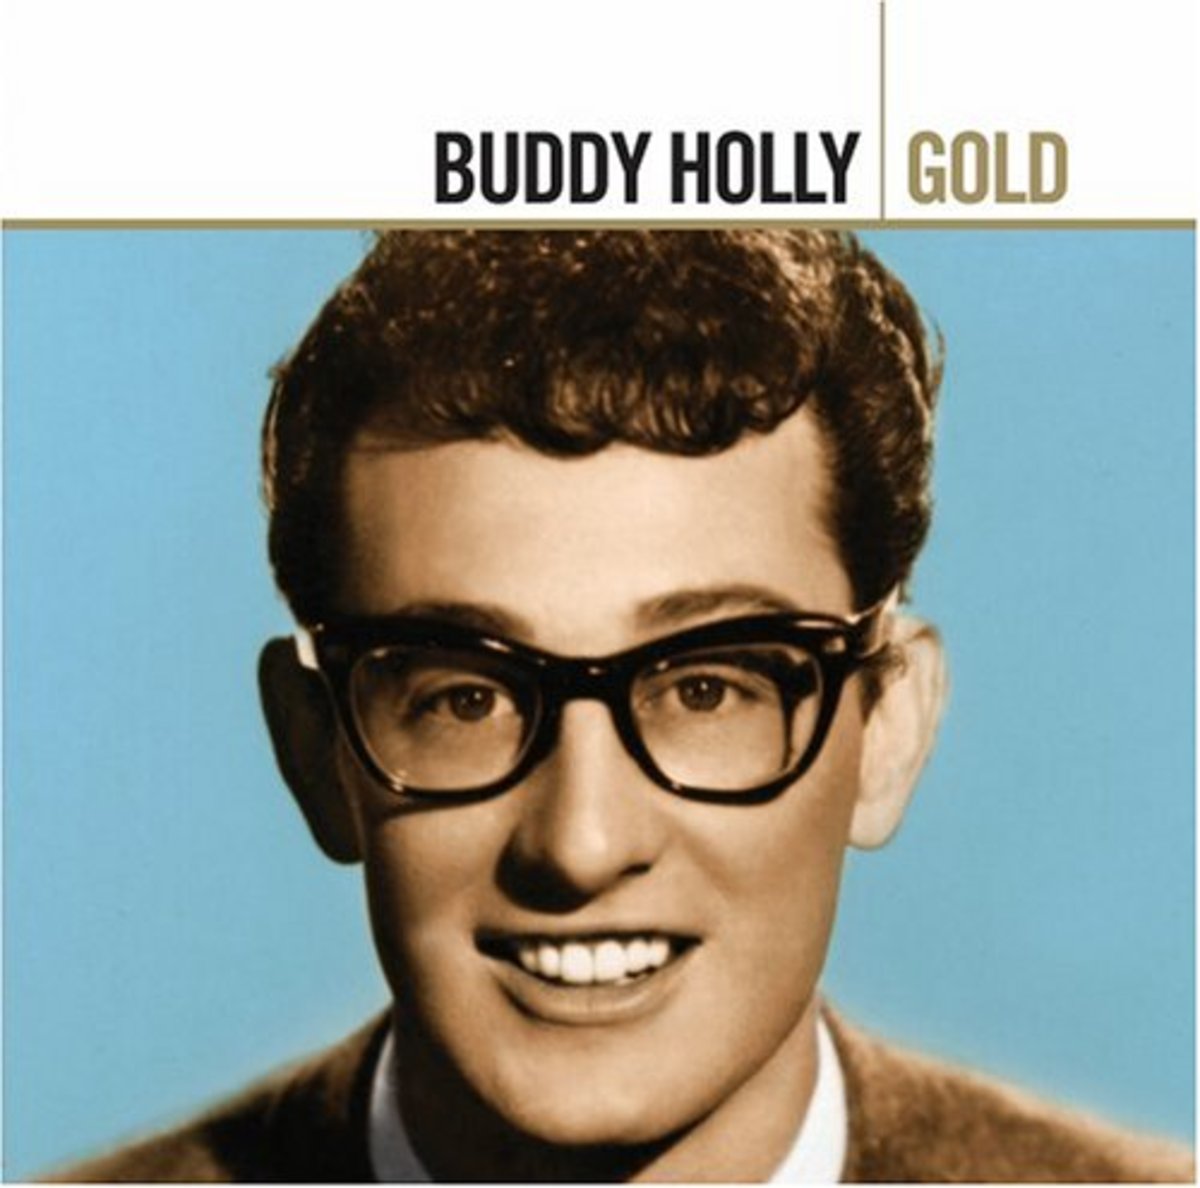 The Pride of Lubbock, Texas, Buddy Holly!